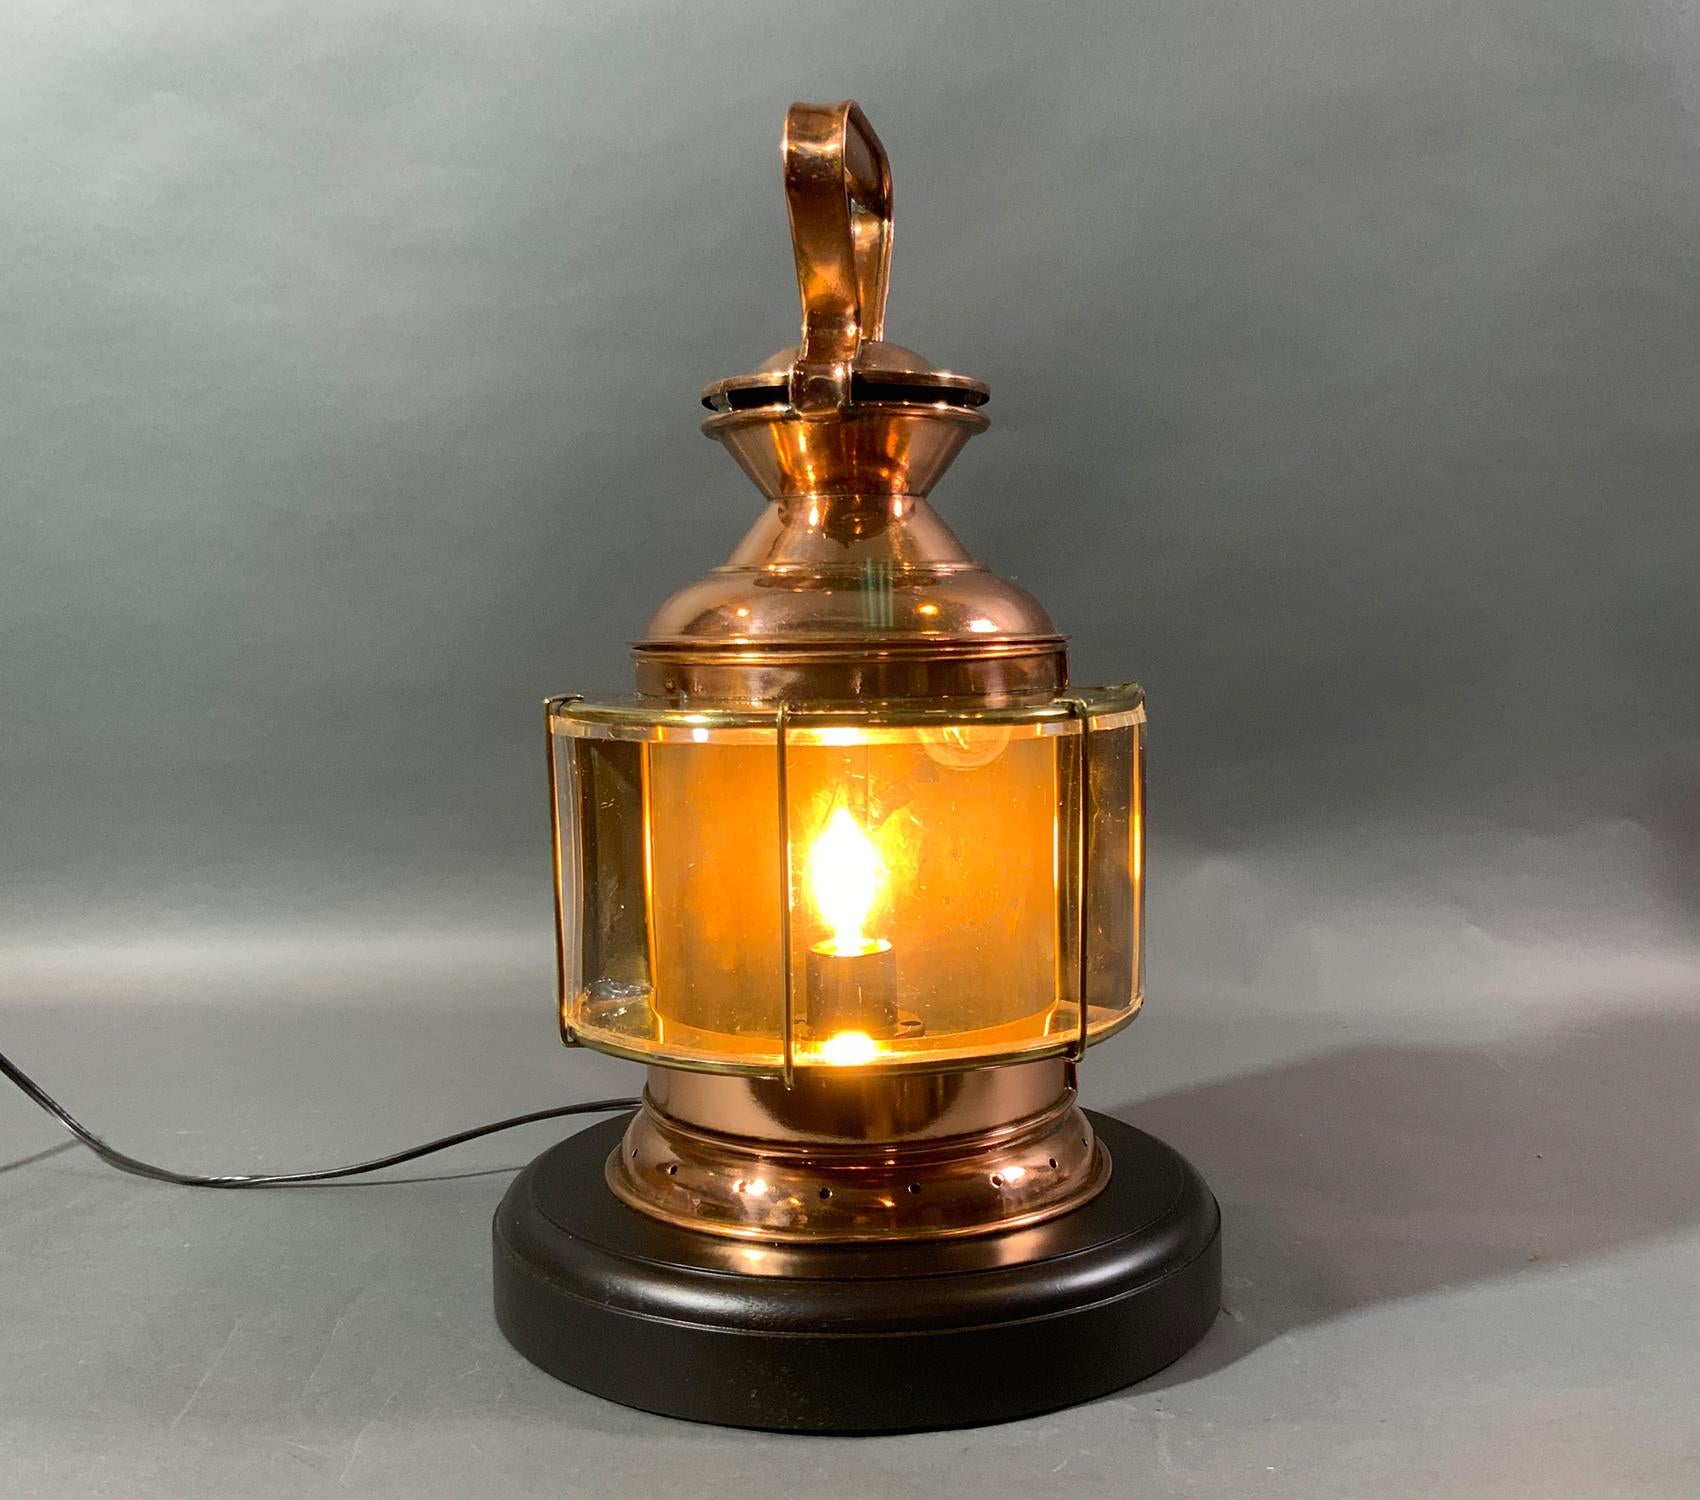 Solid copper signal lantern with curved Perspex lens with brass bars. Copper carry handles. Mounting flange on rear. Mounted to a thick mahogany base. Lantern has been fitted with an electric socket and wire for home use. Thought to be of French